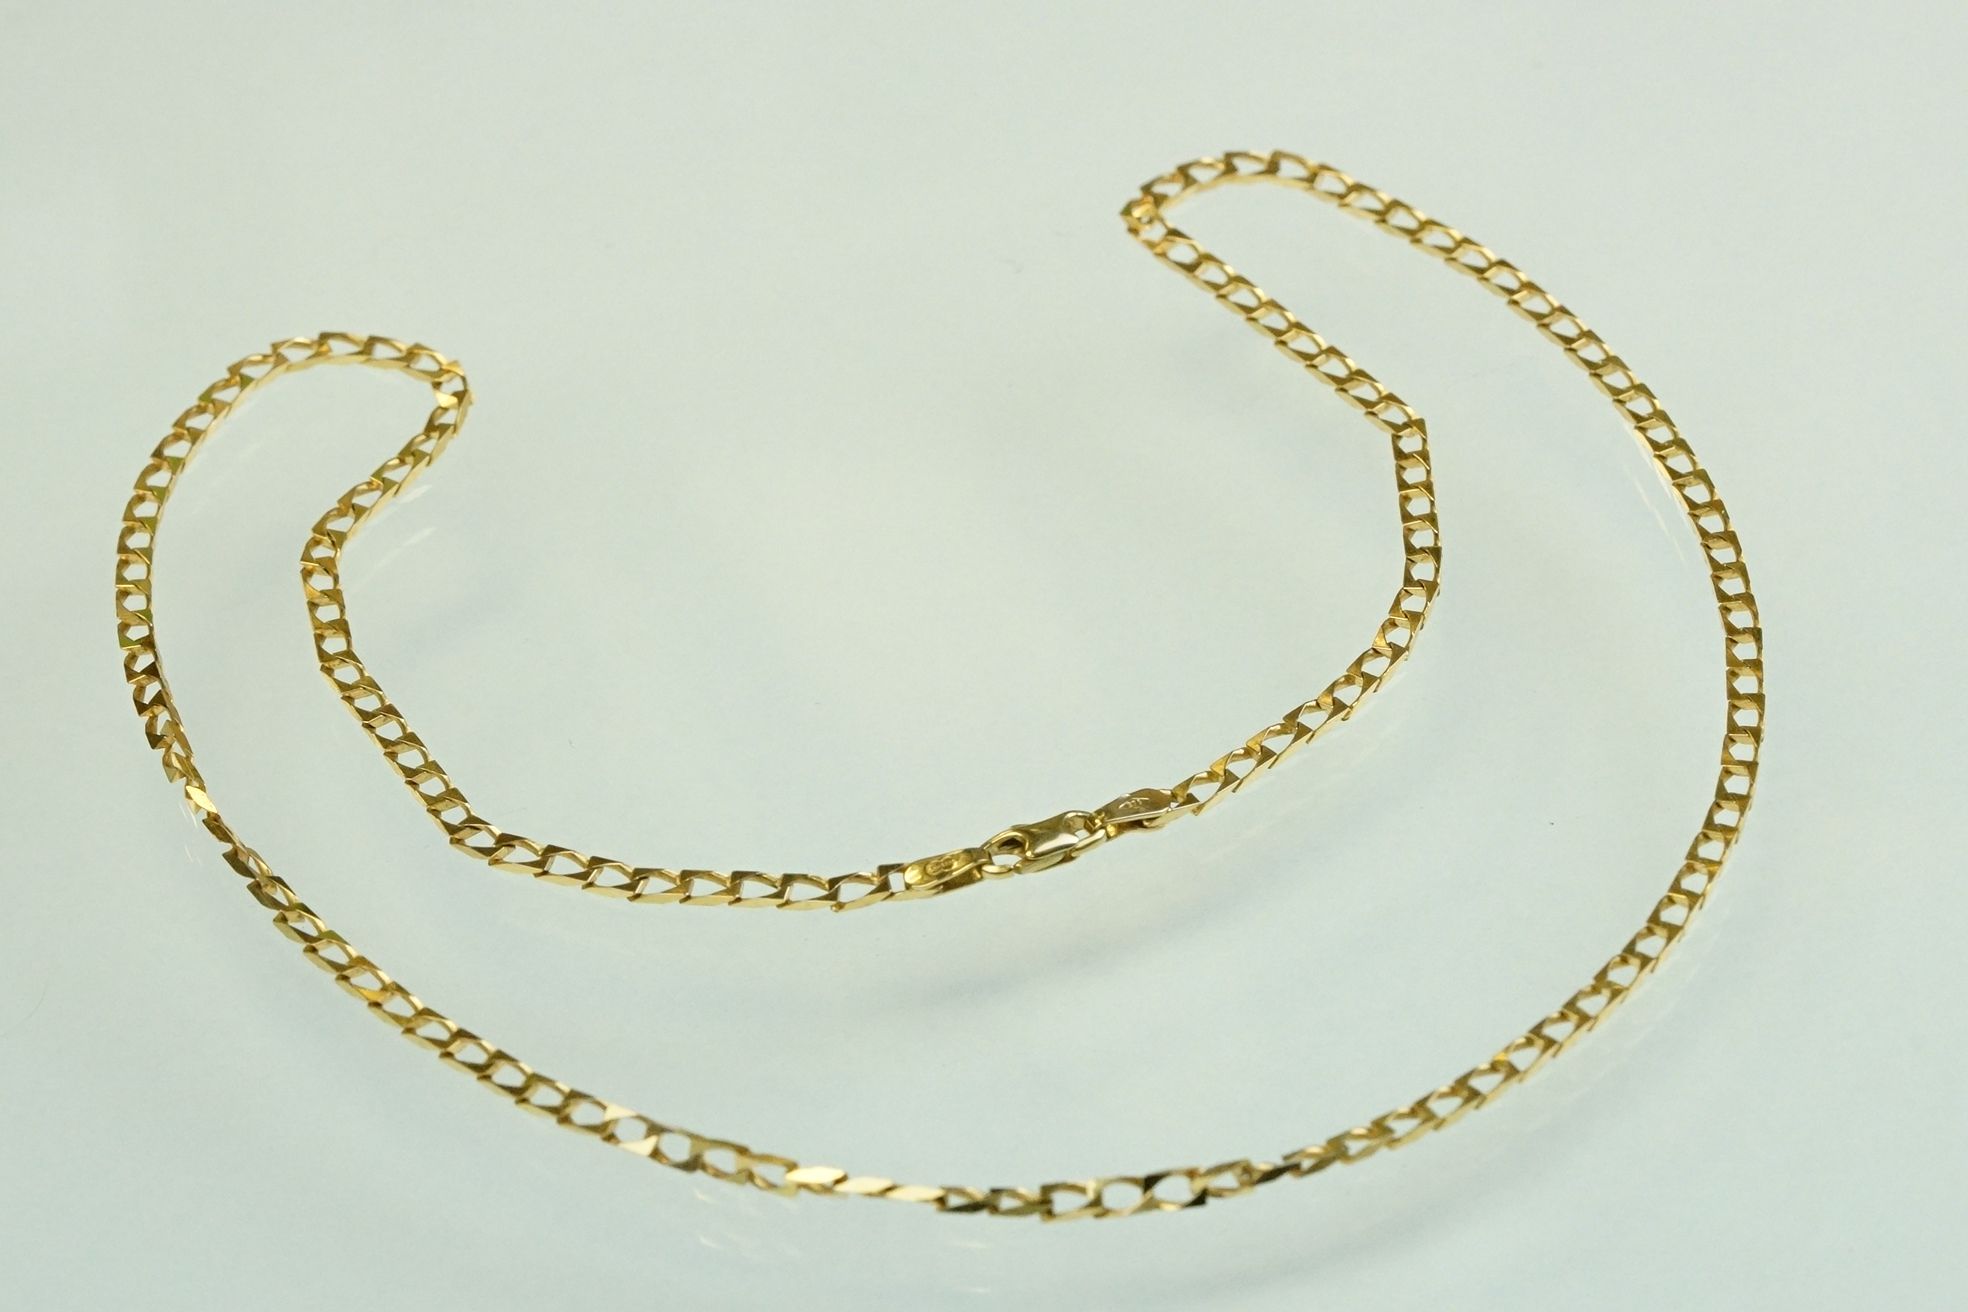 9ct yellow gold flat curb link necklace, lobster clasp, length approx 46cm